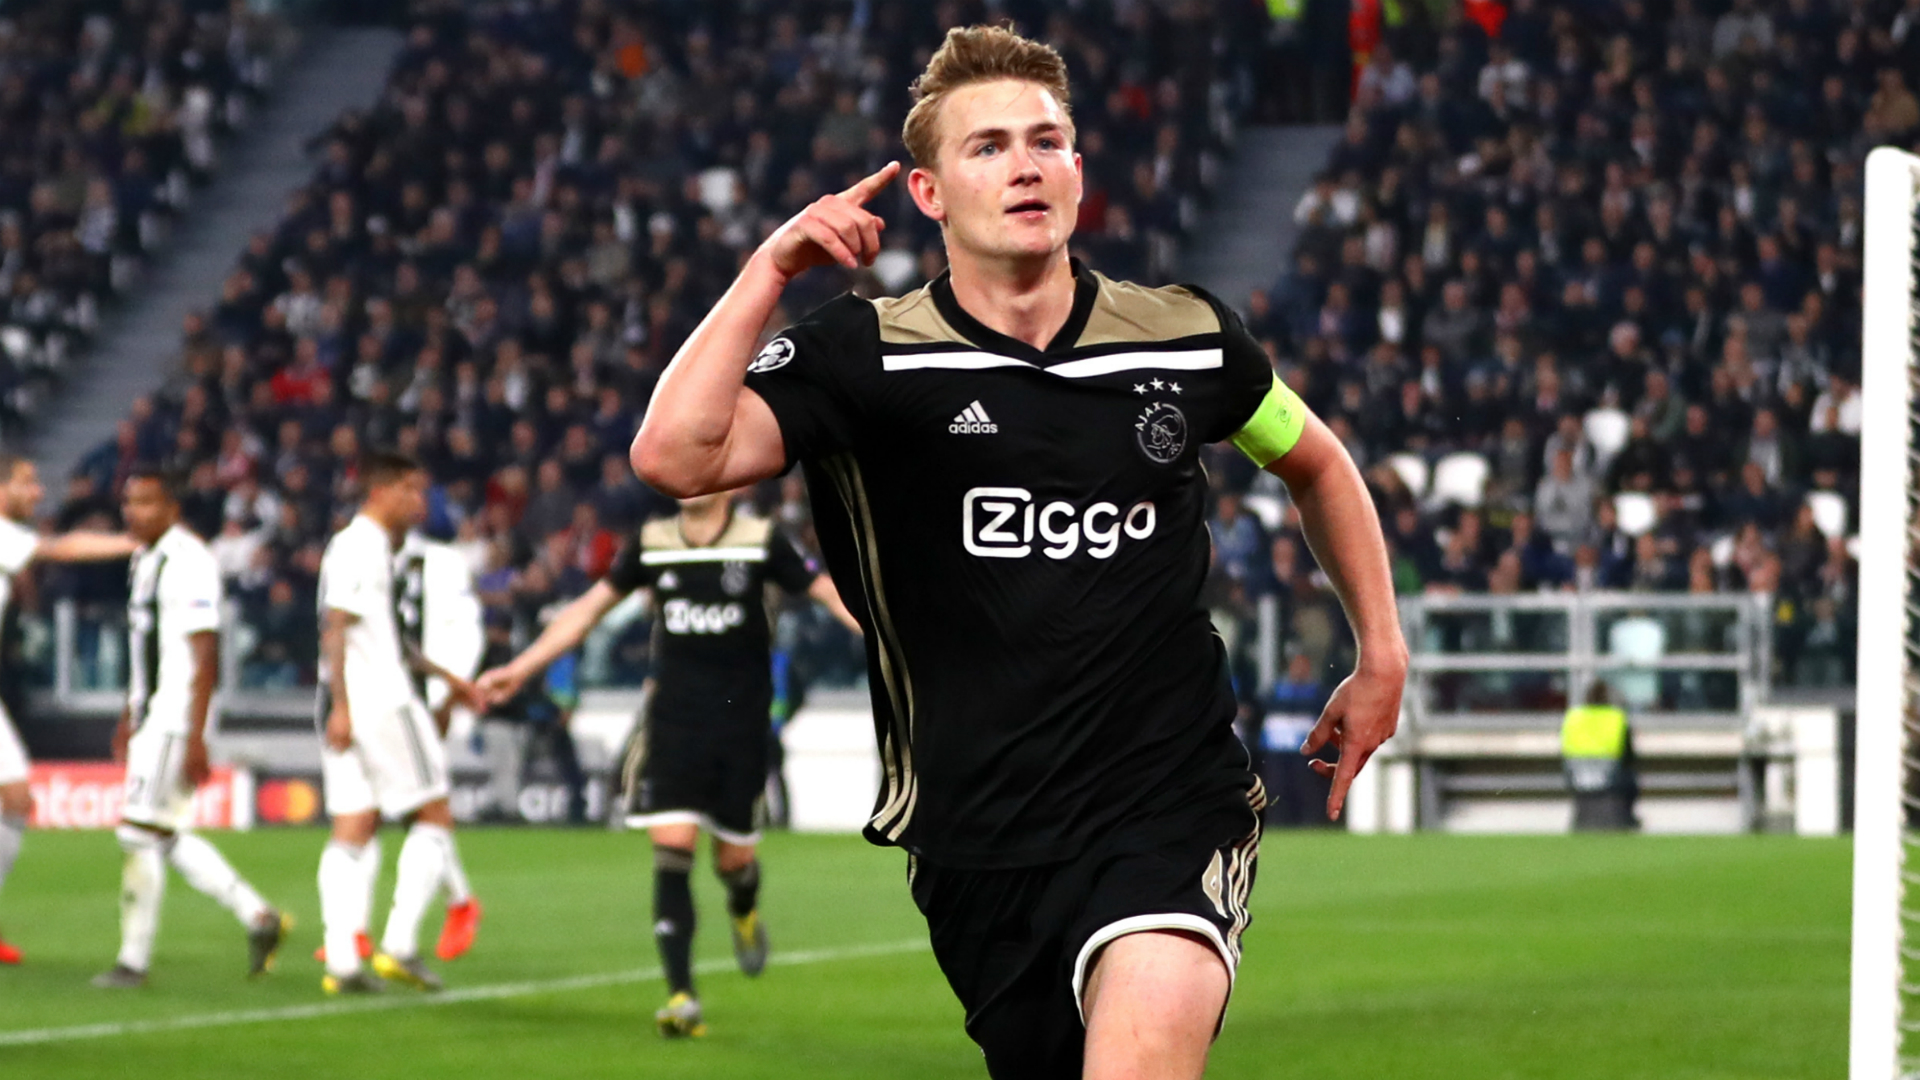 Daley Blind lauded Ajax team-mate and reported Barcelona target Matthijs de Ligt after they won the Eredivisie.